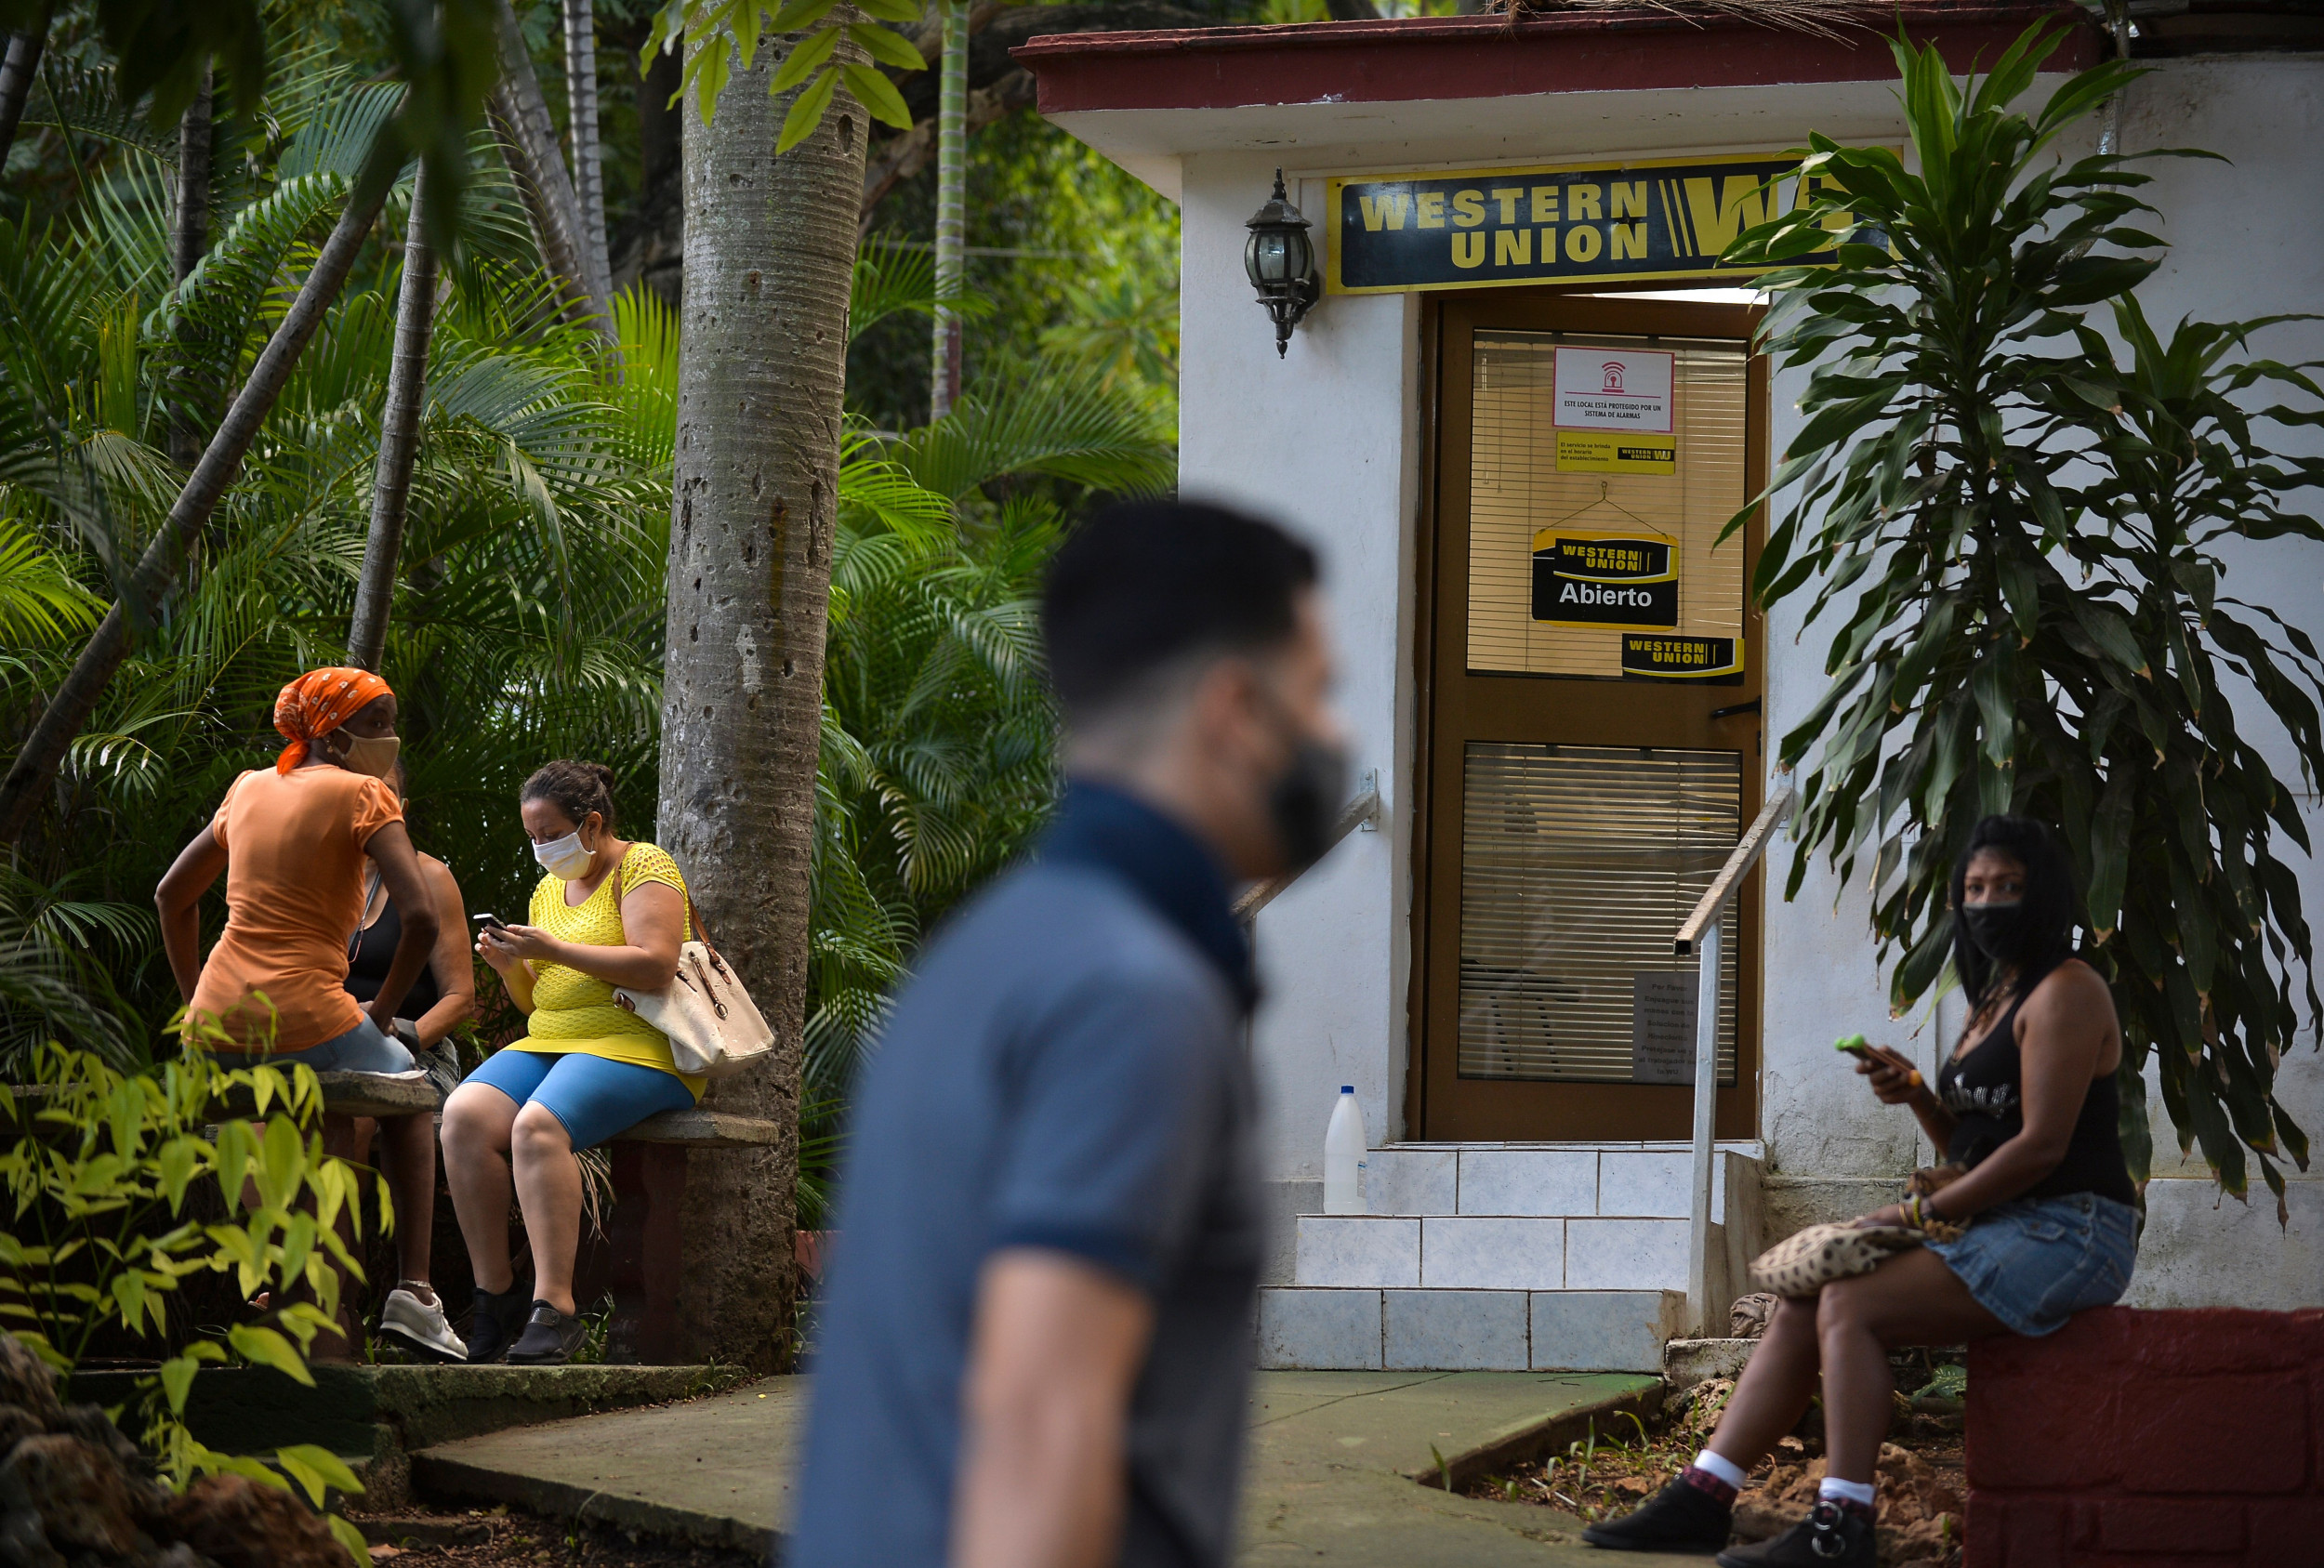 Because of Trump sanctions, Western Union remittances come to an end in Cuba